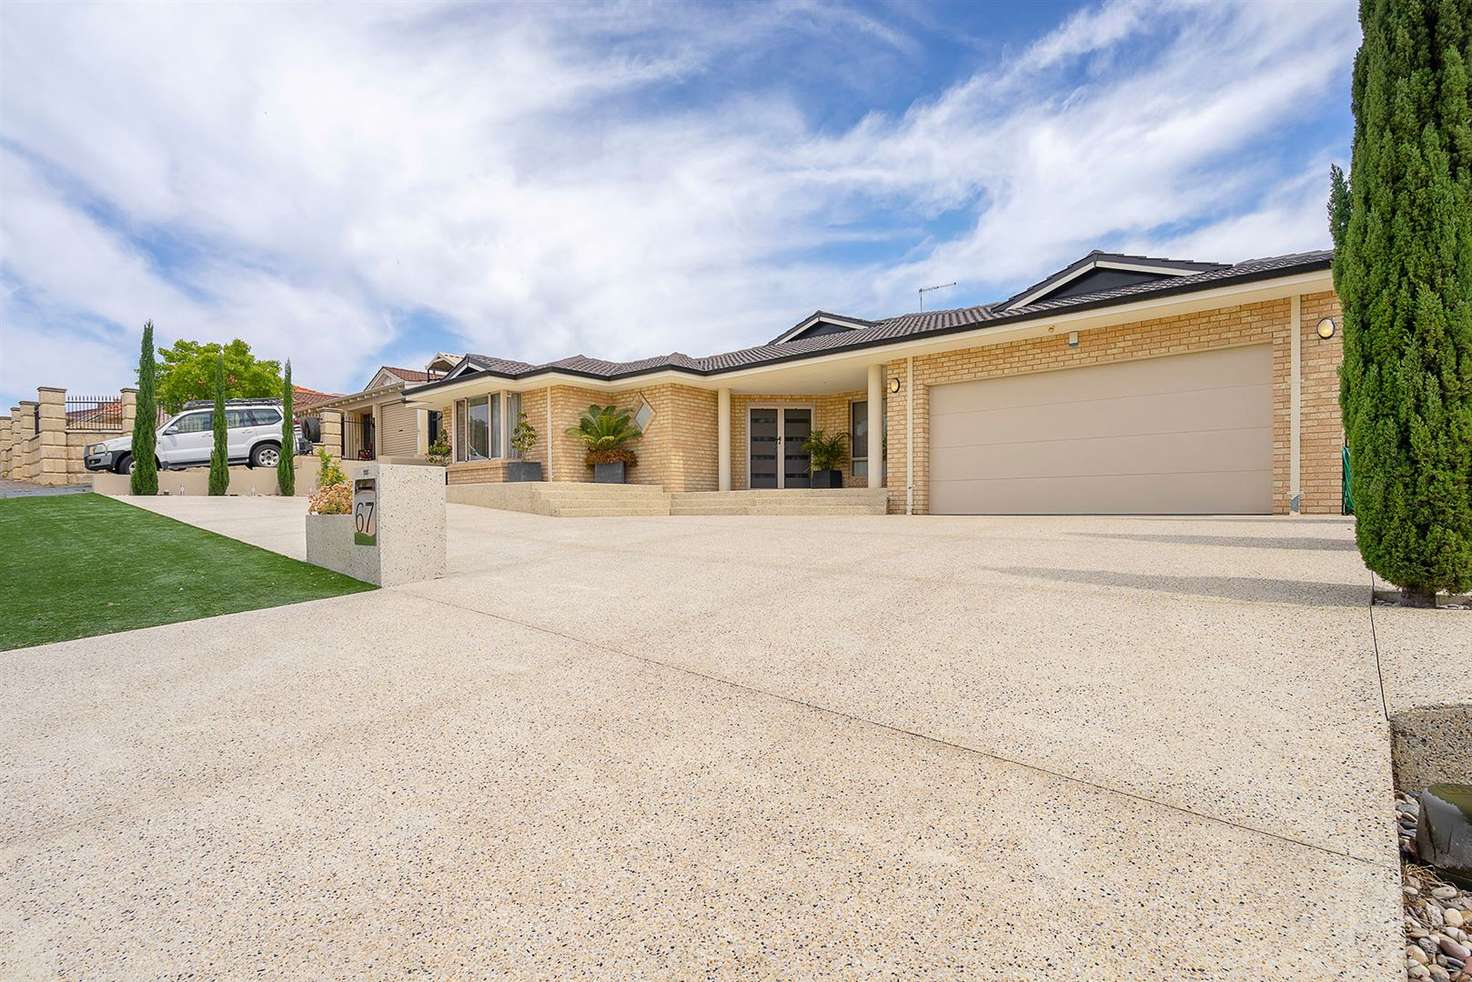 Main view of Homely house listing, 67 Amity Blvd, Coogee WA 6166